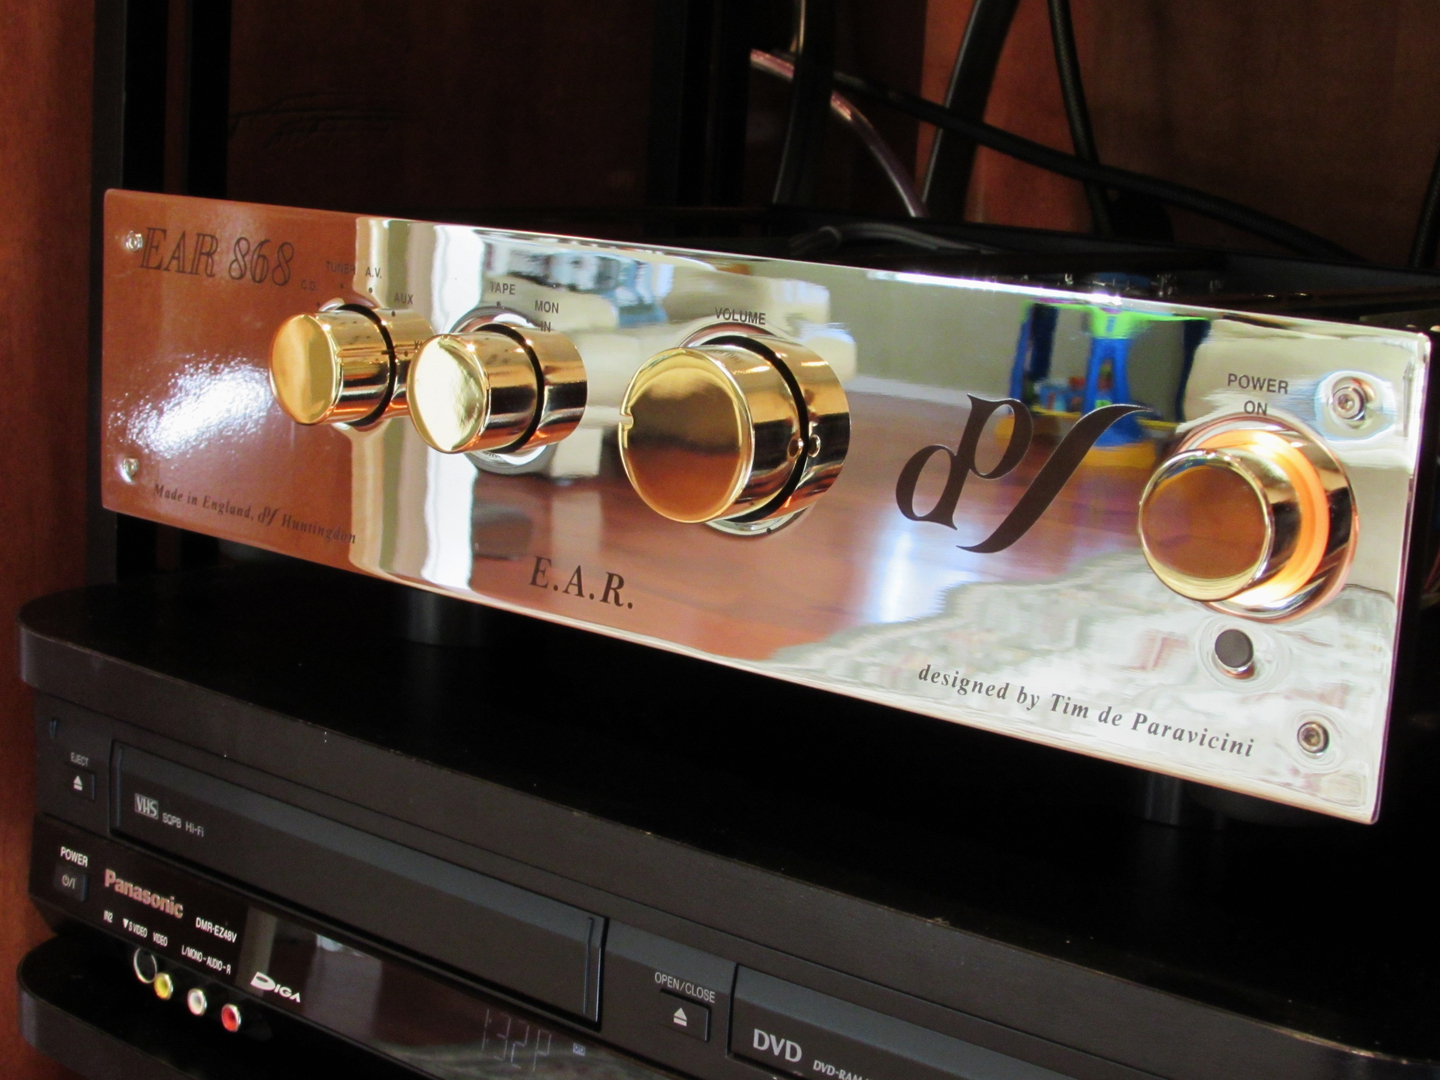 A silver amplifier with gold knobs